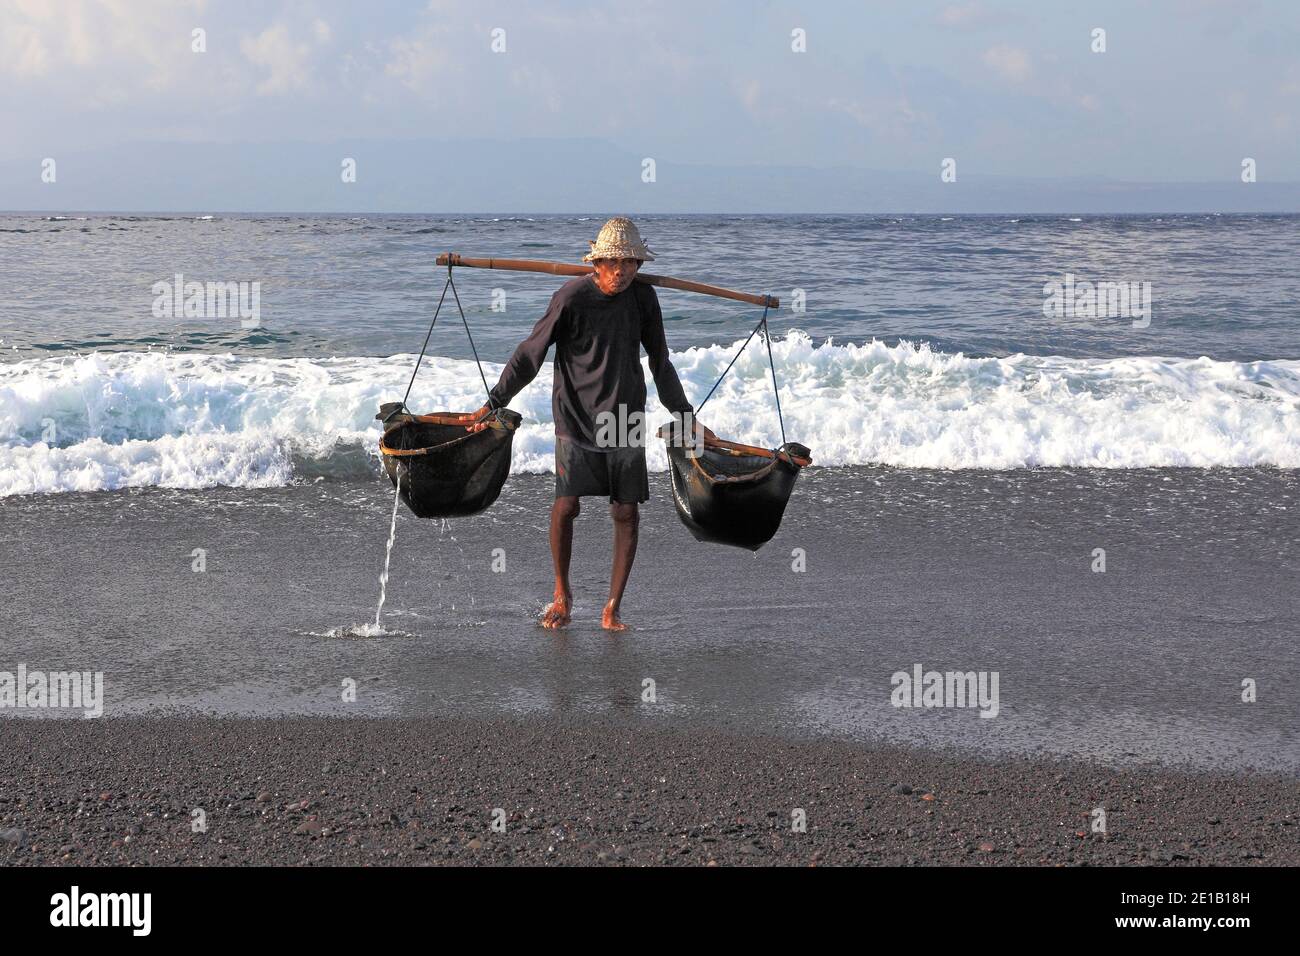 One of the few remaining traditional salt makers in Bali, at Kusamba Beach. Bali, Indonesia. Workers start before sunrise to water the sand with sea w Stock Photo